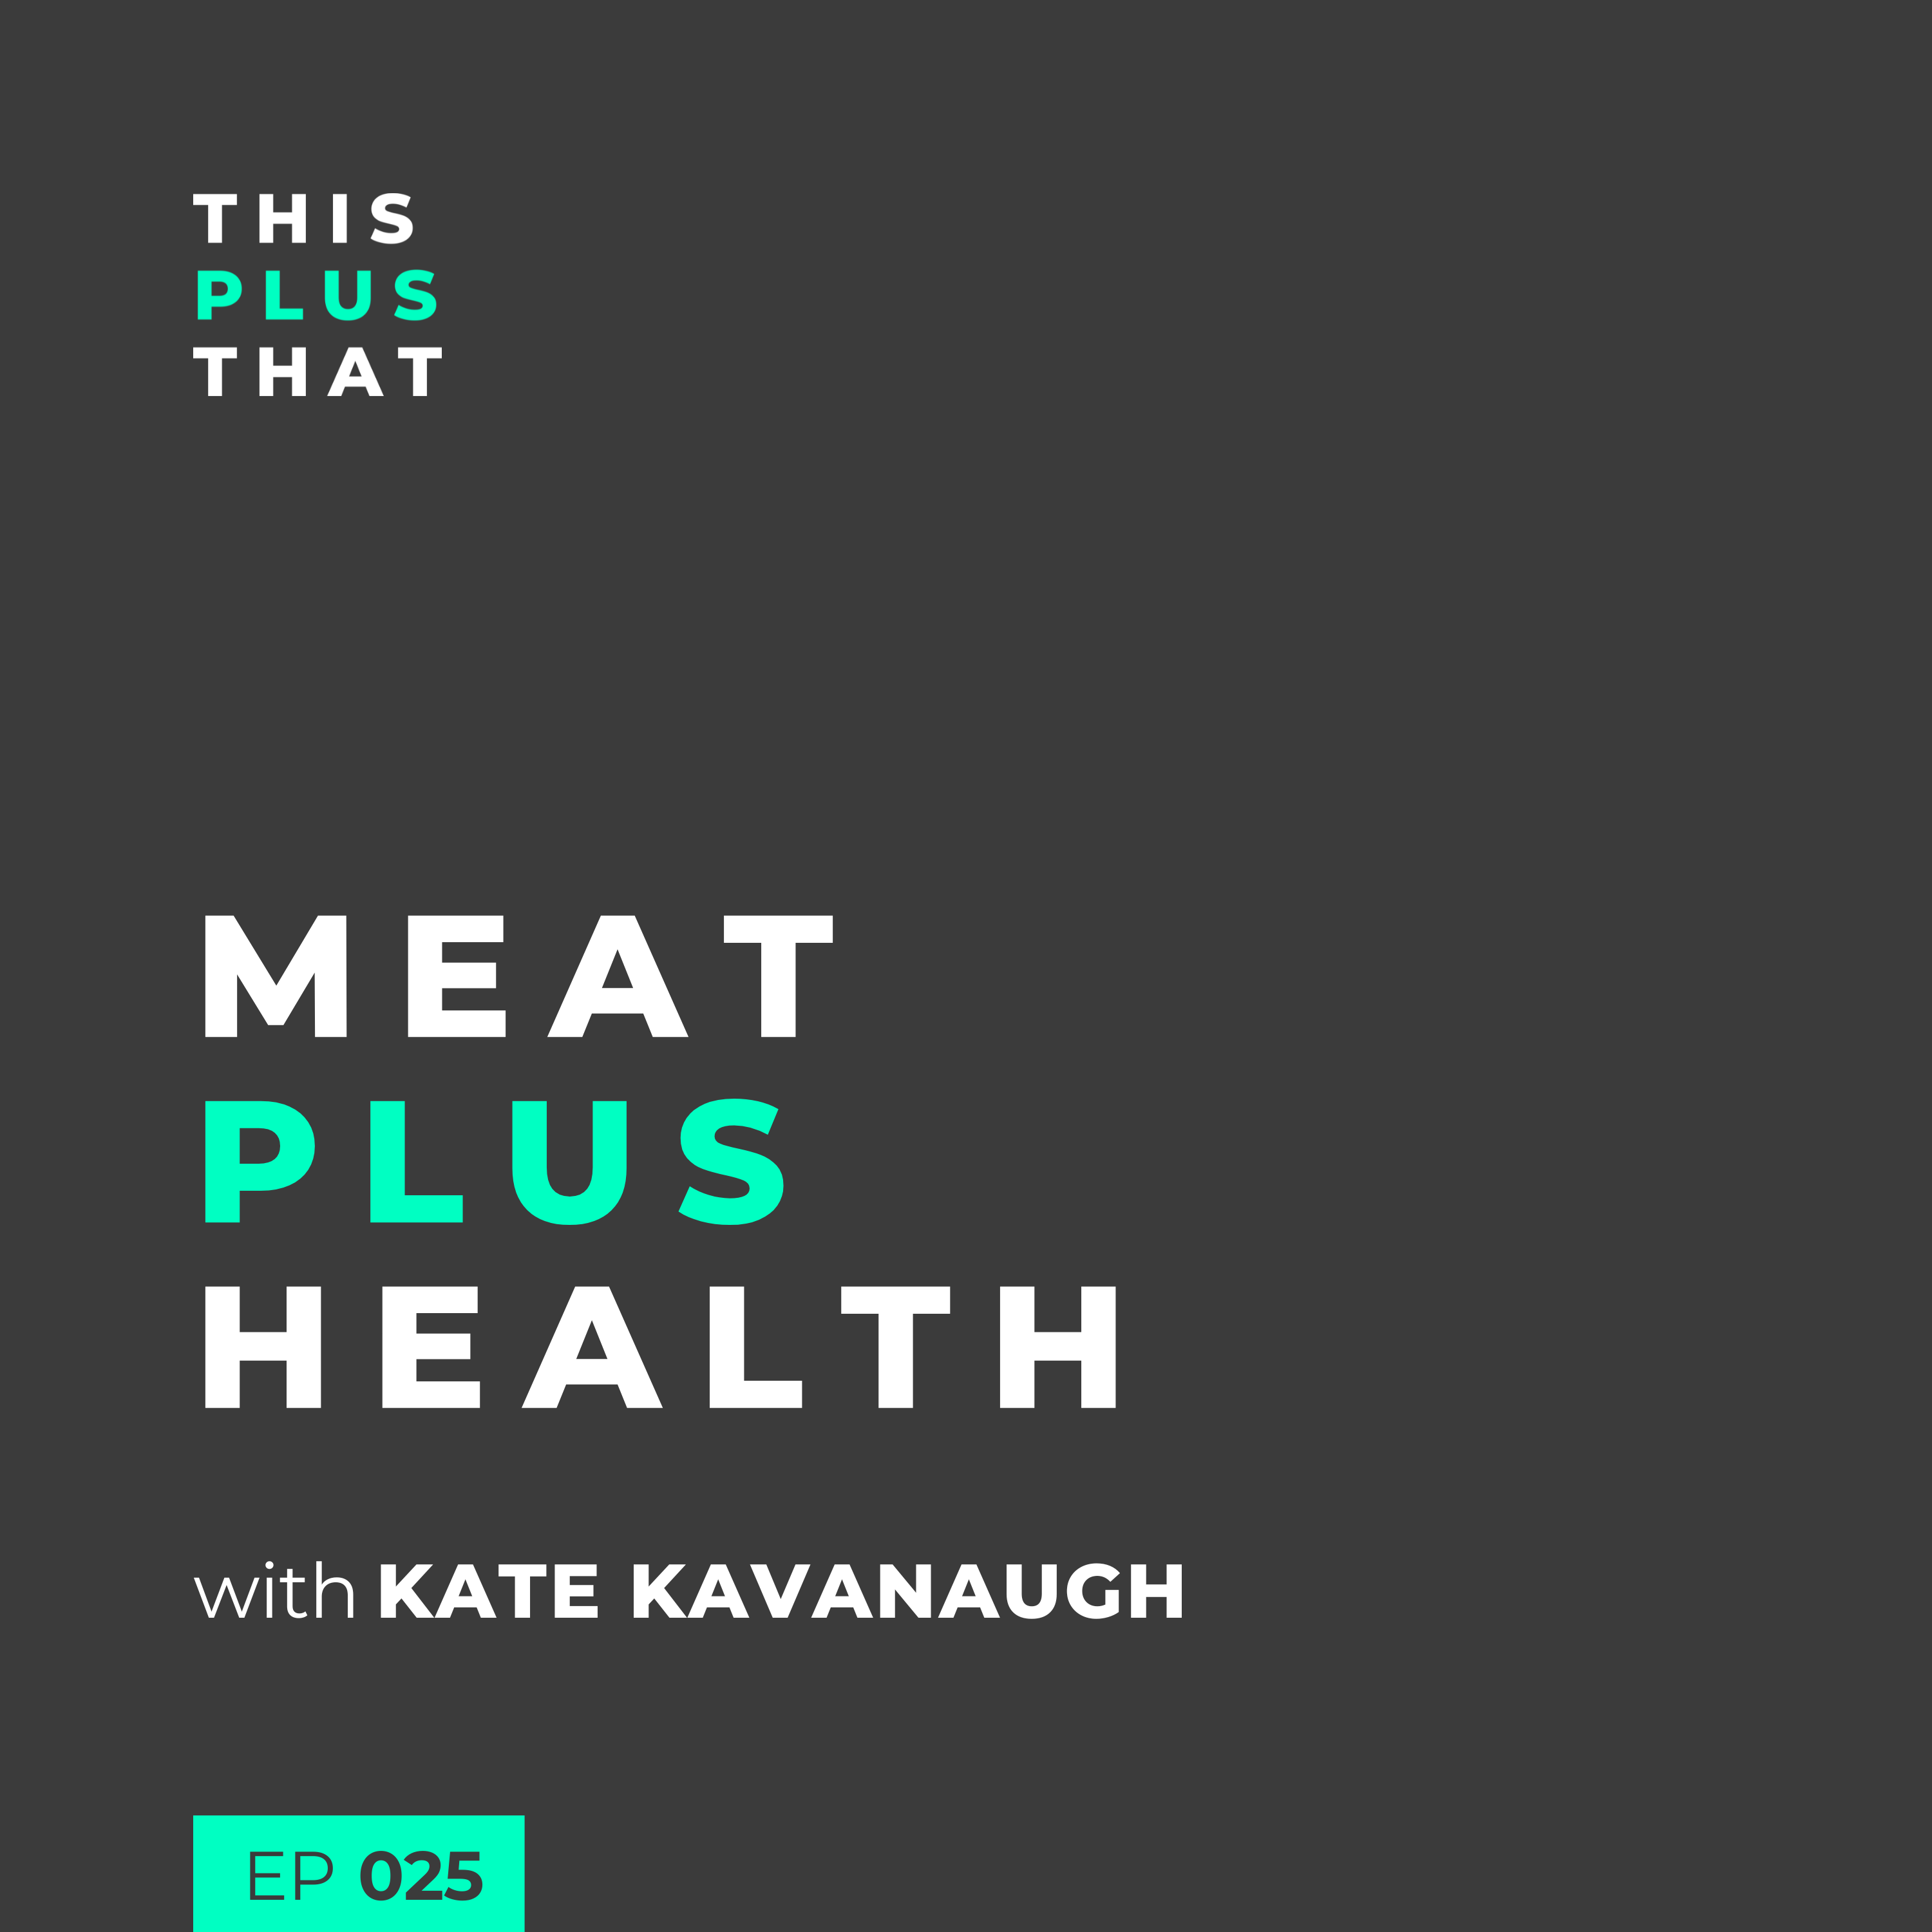 Meat + Health with Kate Kavanaugh